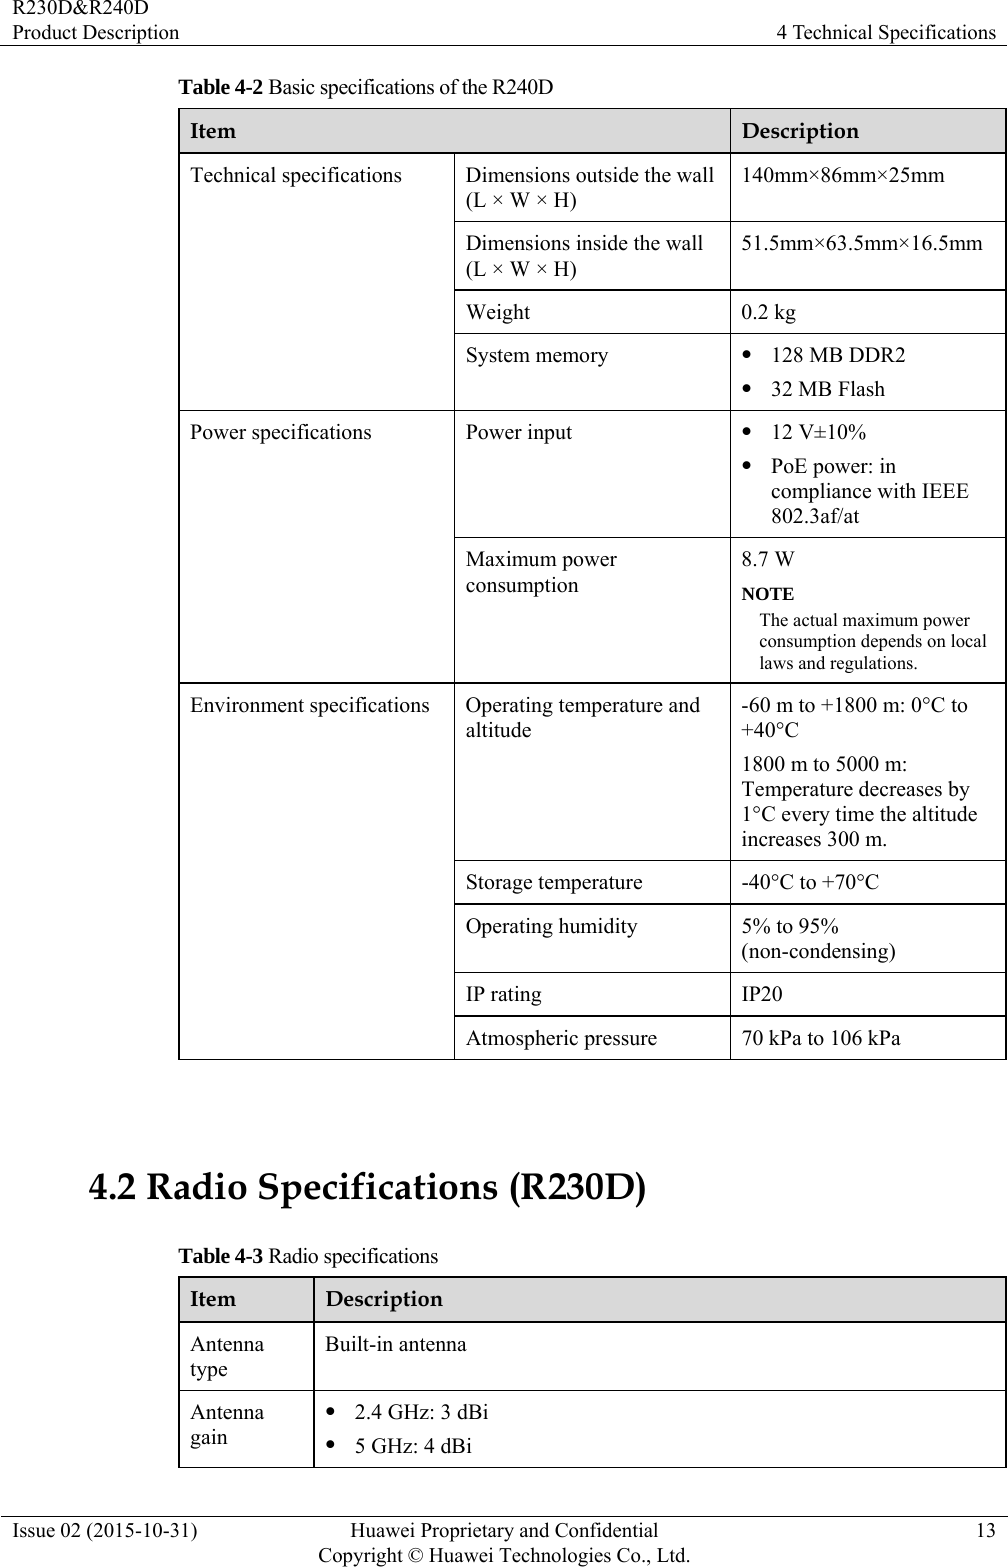 R230D&amp;R240D Product Description  4 Technical Specifications Issue 02 (2015-10-31)  Huawei Proprietary and Confidential         Copyright © Huawei Technologies Co., Ltd.13 Table 4-2 Basic specifications of the R240D Item  Description Technical specifications  Dimensions outside the wall (L × W × H) 140mm×86mm×25mm Dimensions inside the wall (L × W × H) 51.5mm×63.5mm×16.5mm Weight 0.2 kg System memory  z 128 MB DDR2 z 32 MB Flash Power specifications  Power input  z 12 V±10% z PoE power: in compliance with IEEE 802.3af/at Maximum power consumption 8.7 W NOTE The actual maximum power consumption depends on local laws and regulations. Environment specifications  Operating temperature and altitude -60 m to +1800 m: 0°C to +40°C 1800 m to 5000 m: Temperature decreases by 1°C every time the altitude increases 300 m. Storage temperature  -40°C to +70°C Operating humidity  5% to 95% (non-condensing) IP rating  IP20 Atmospheric pressure  70 kPa to 106 kPa  4.2 Radio Specifications (R230D) Table 4-3 Radio specifications Item  Description Antenna type Built-in antenna Antenna gain z 2.4 GHz: 3 dBi z 5 GHz: 4 dBi 